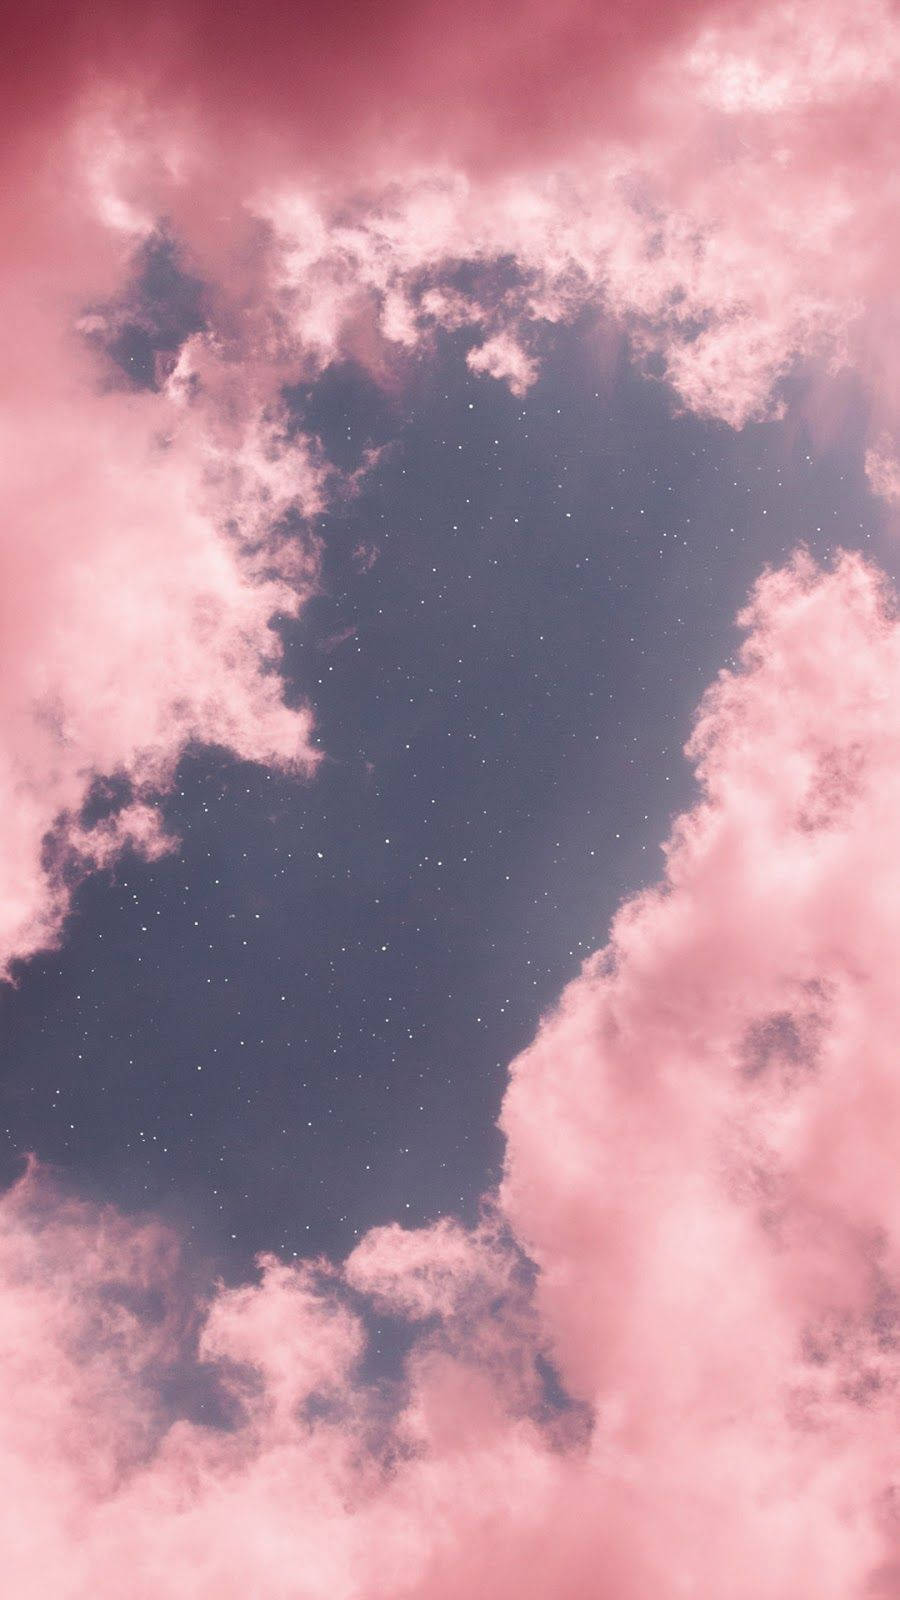 A Glorious View Of A Cute Pink Cloud Wallpaper